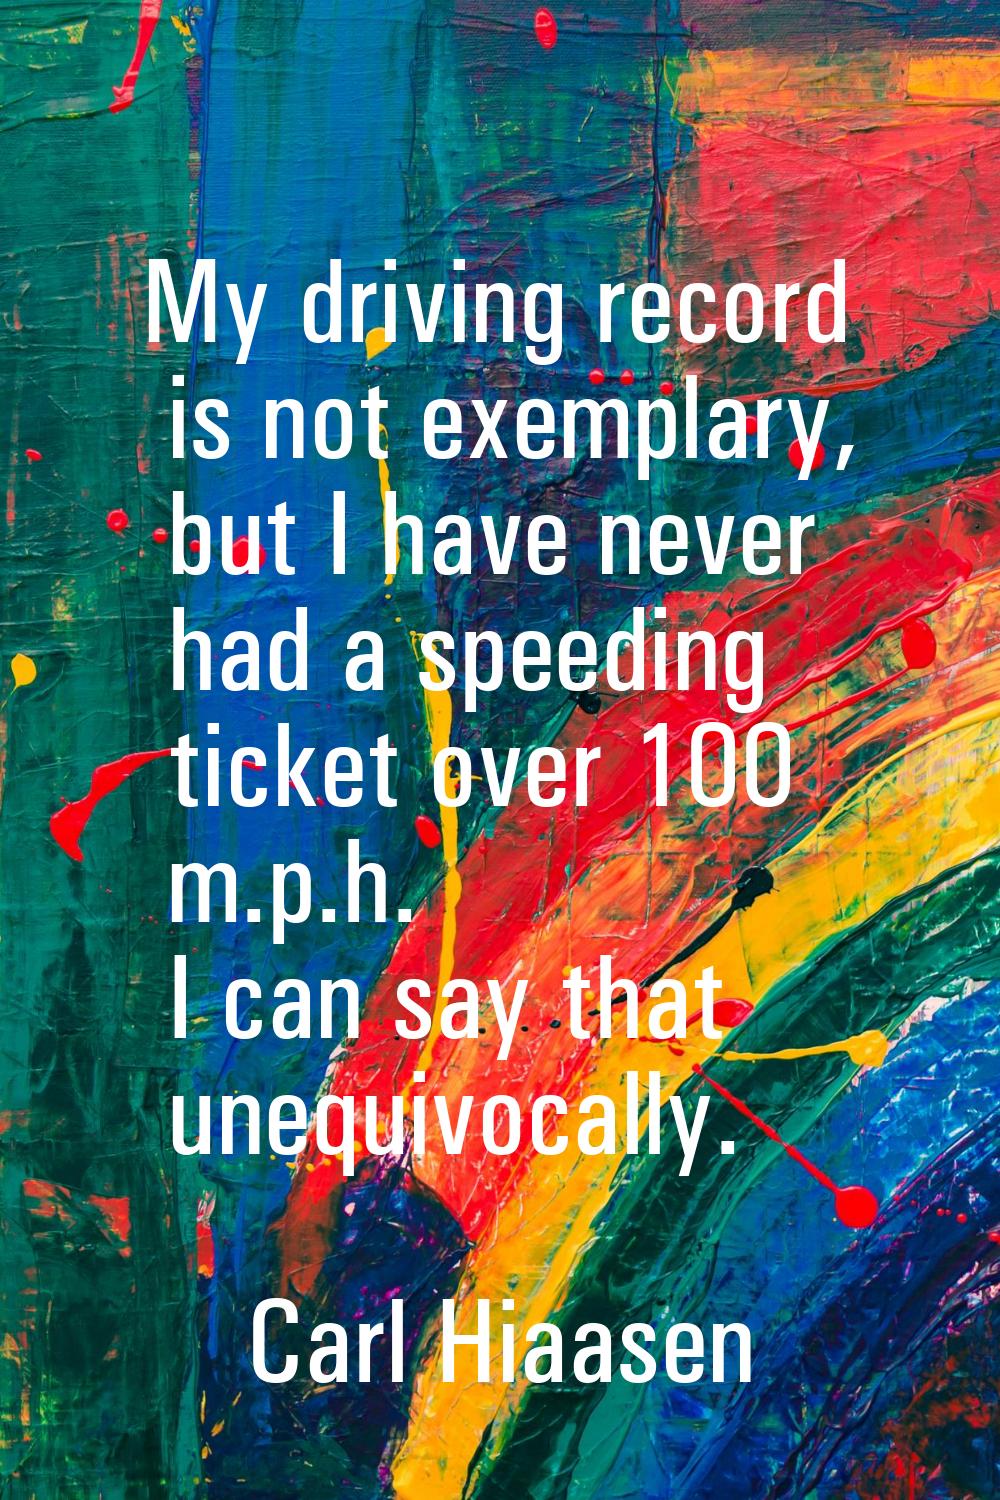 My driving record is not exemplary, but I have never had a speeding ticket over 100 m.p.h. I can sa